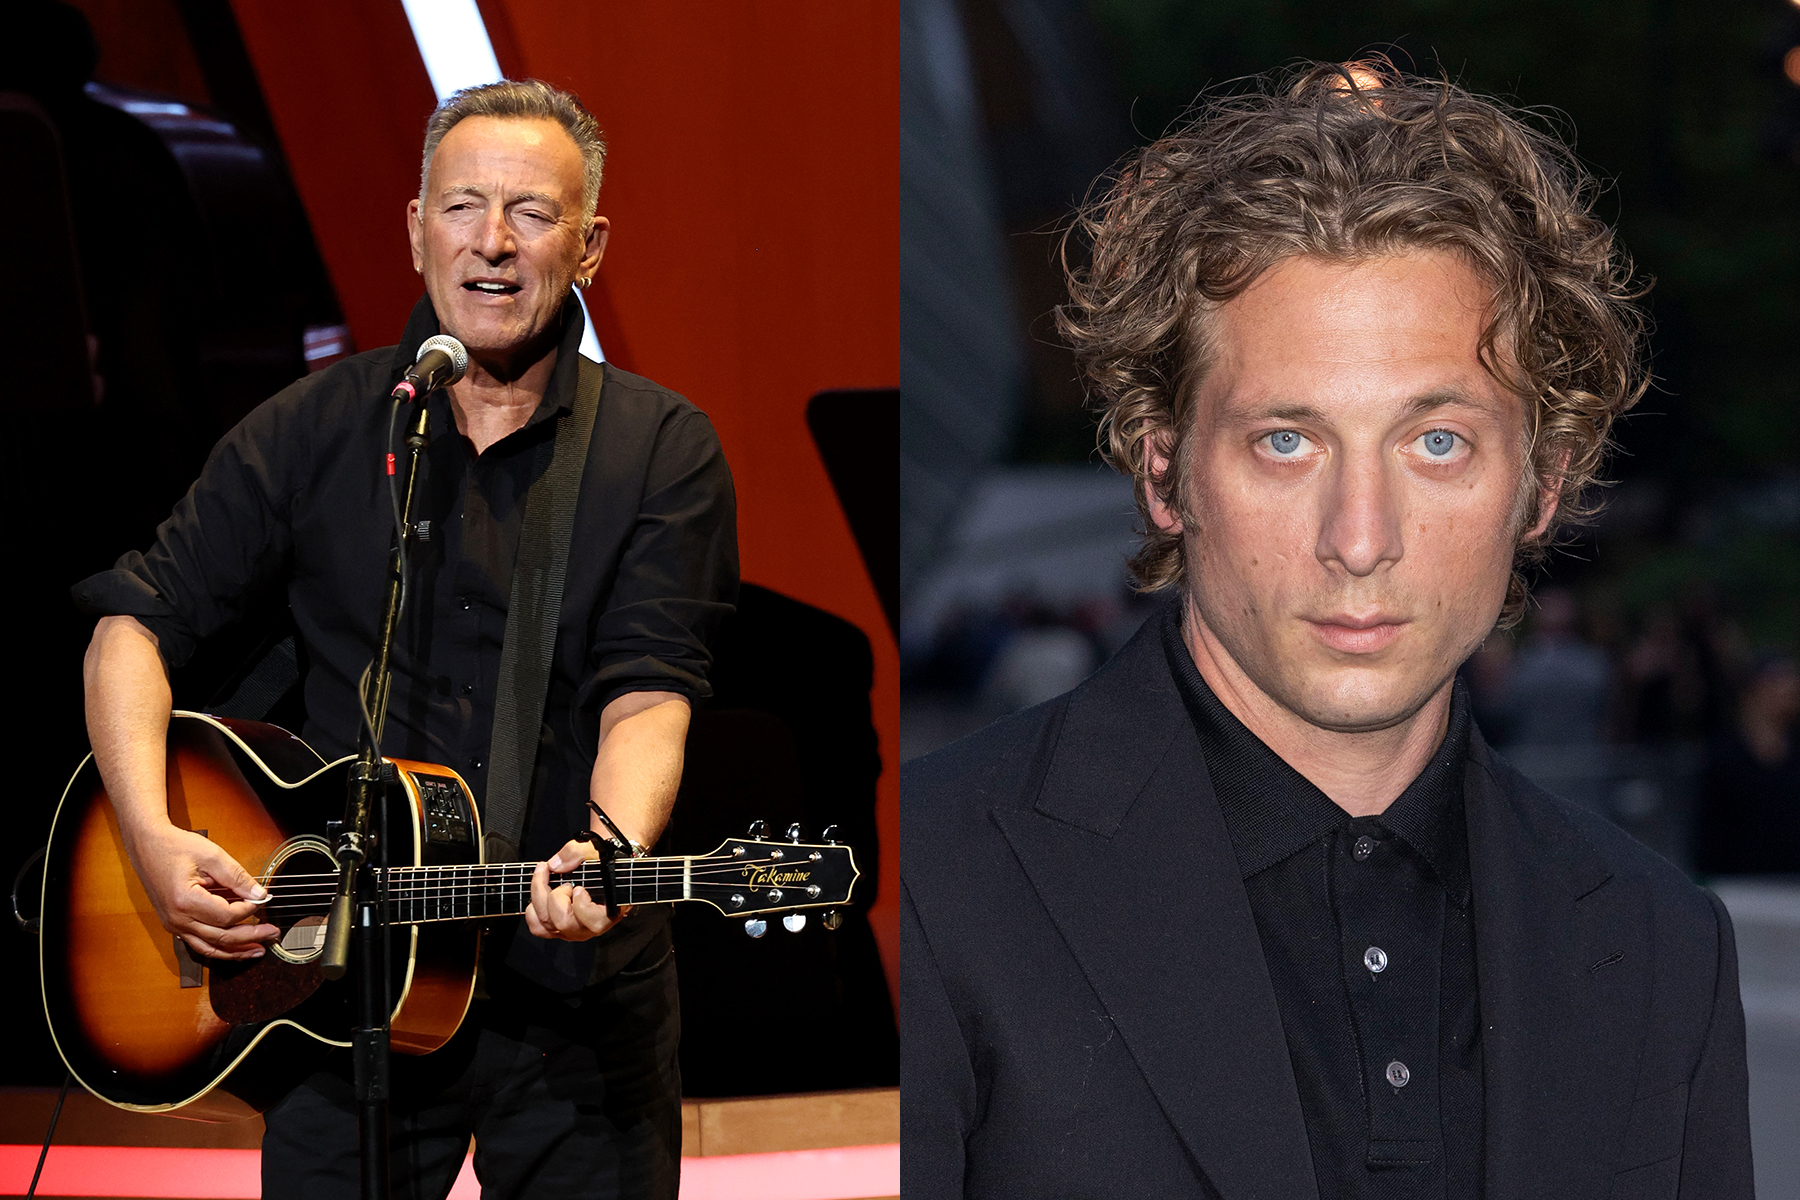 Jeremy Allen White Says He and Bruce Springsteen Have ‘Texted’ Ahead Biopic Portrayal